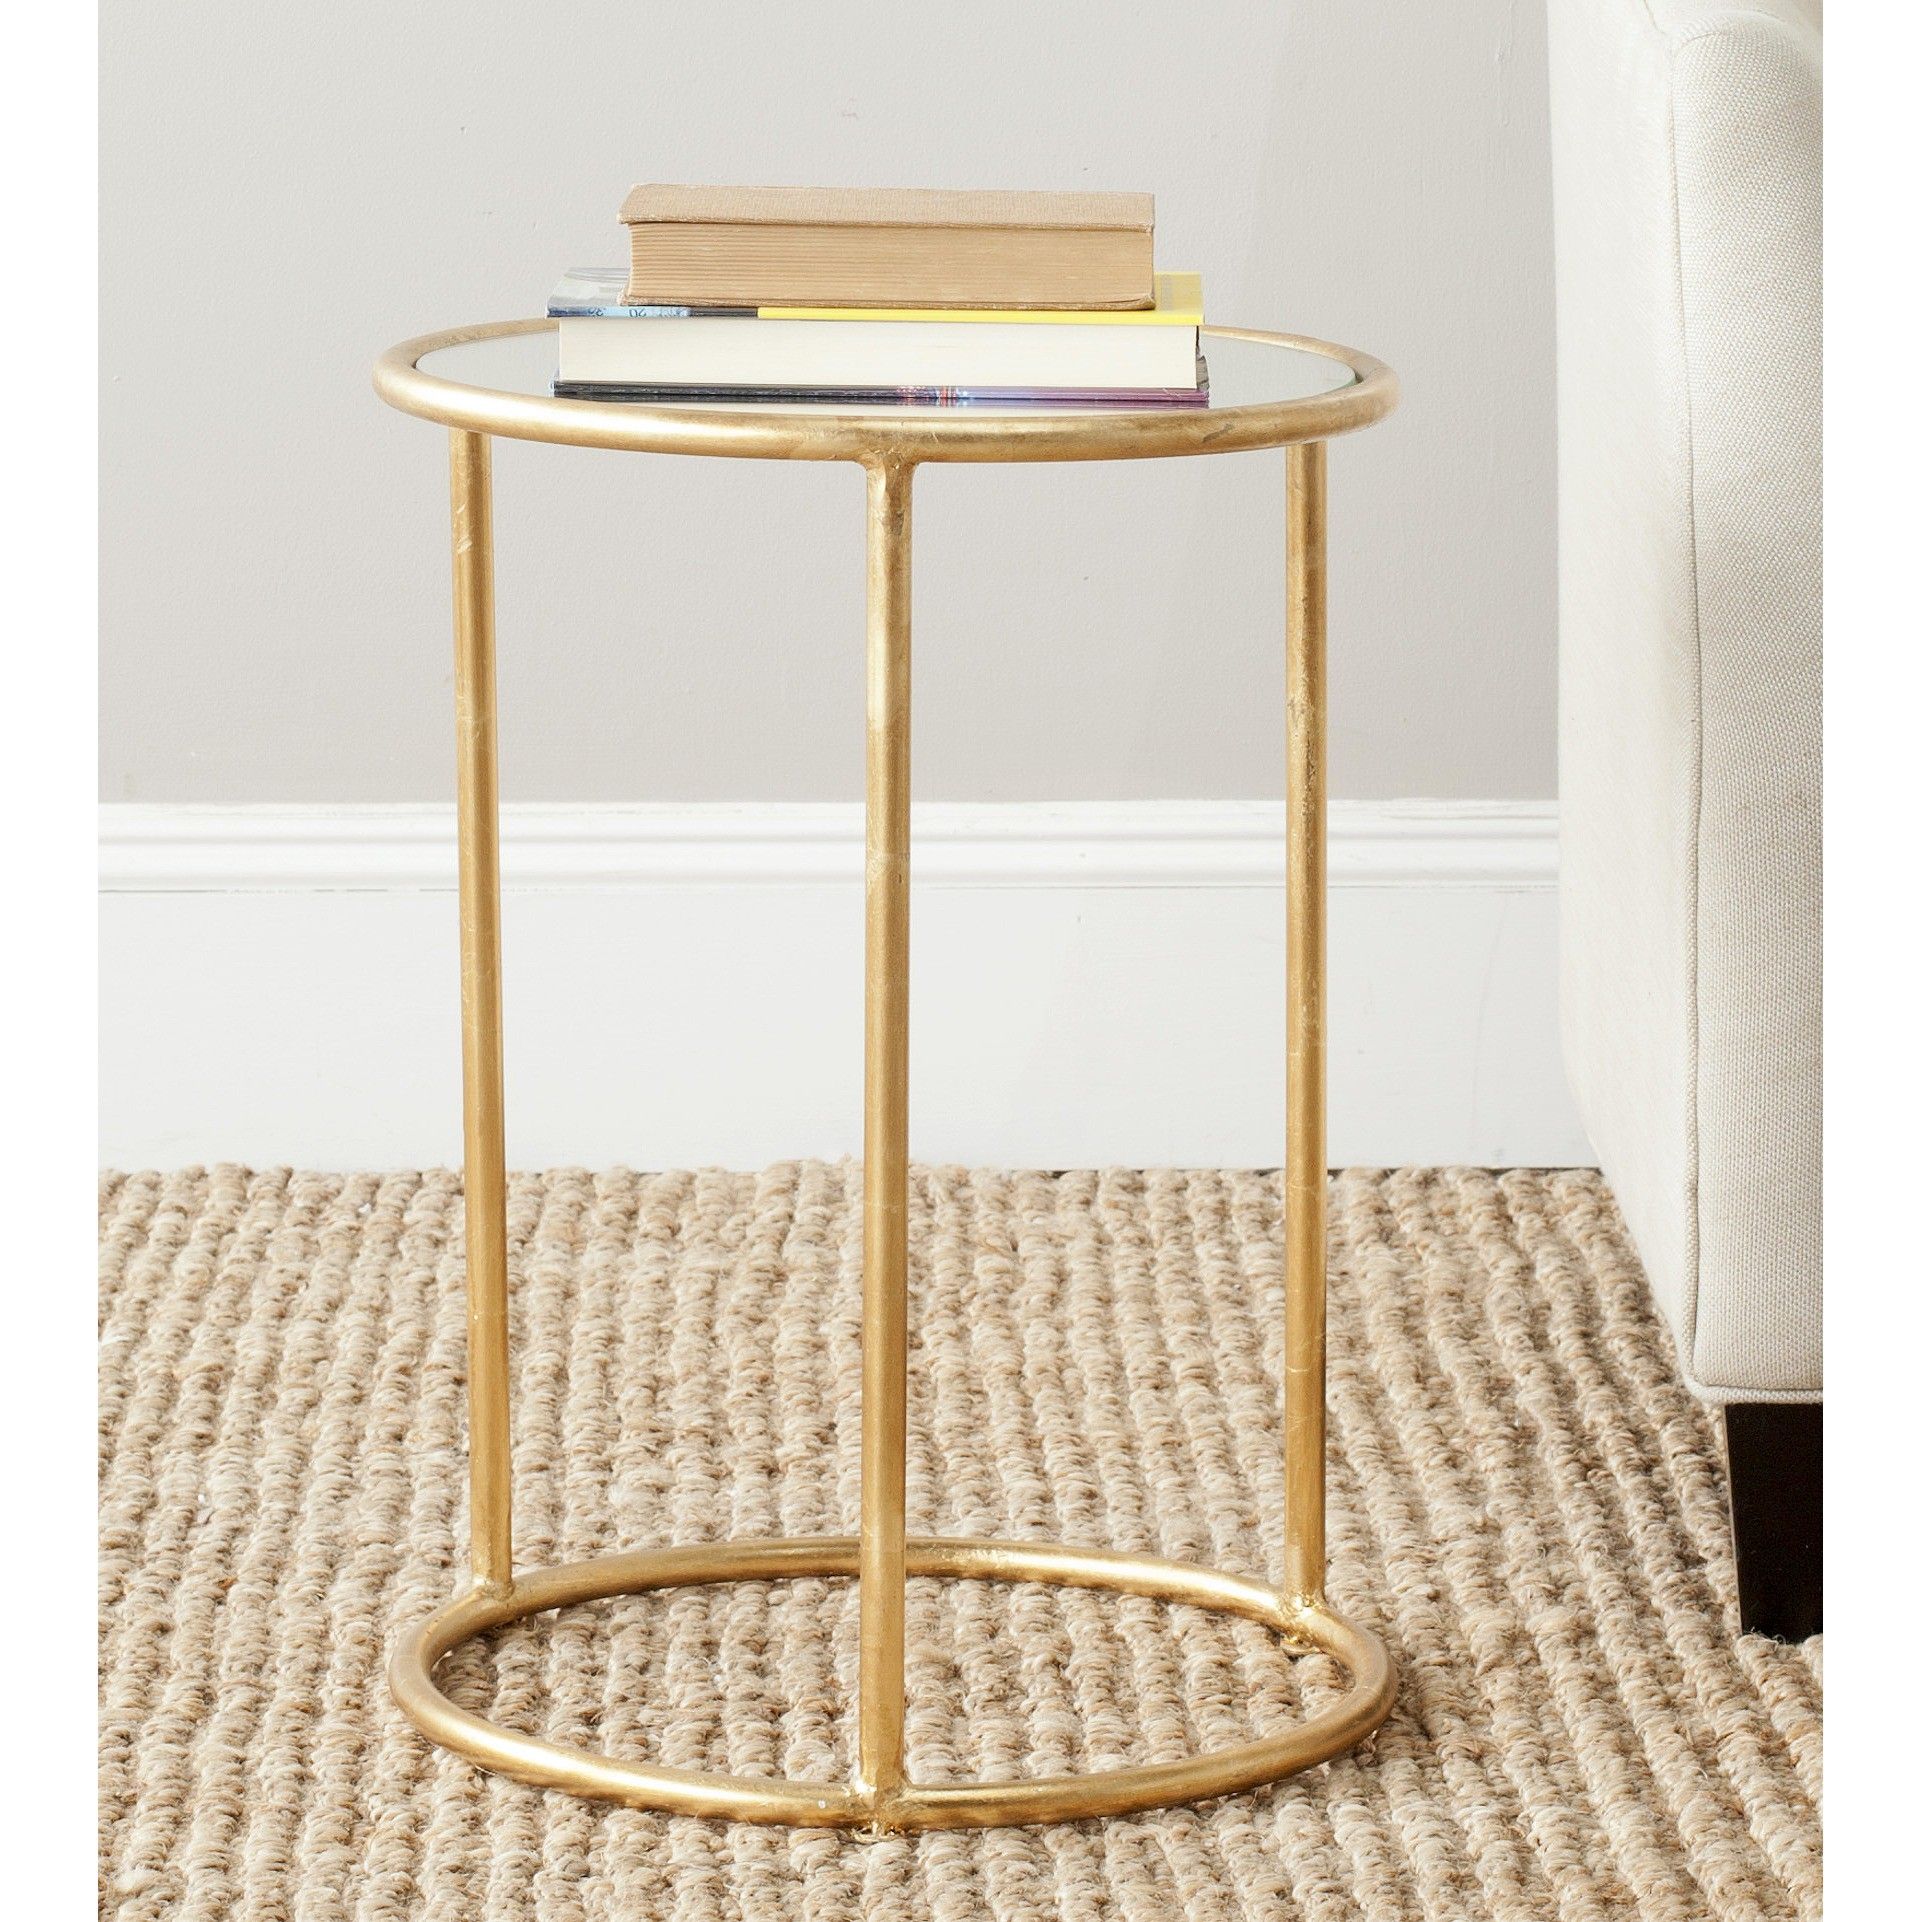 safavieh shay accent table target when apartment wants mirrored grill tools mission lamp antique drop leaf end mid century small lights floor edging pier coupon code off spring